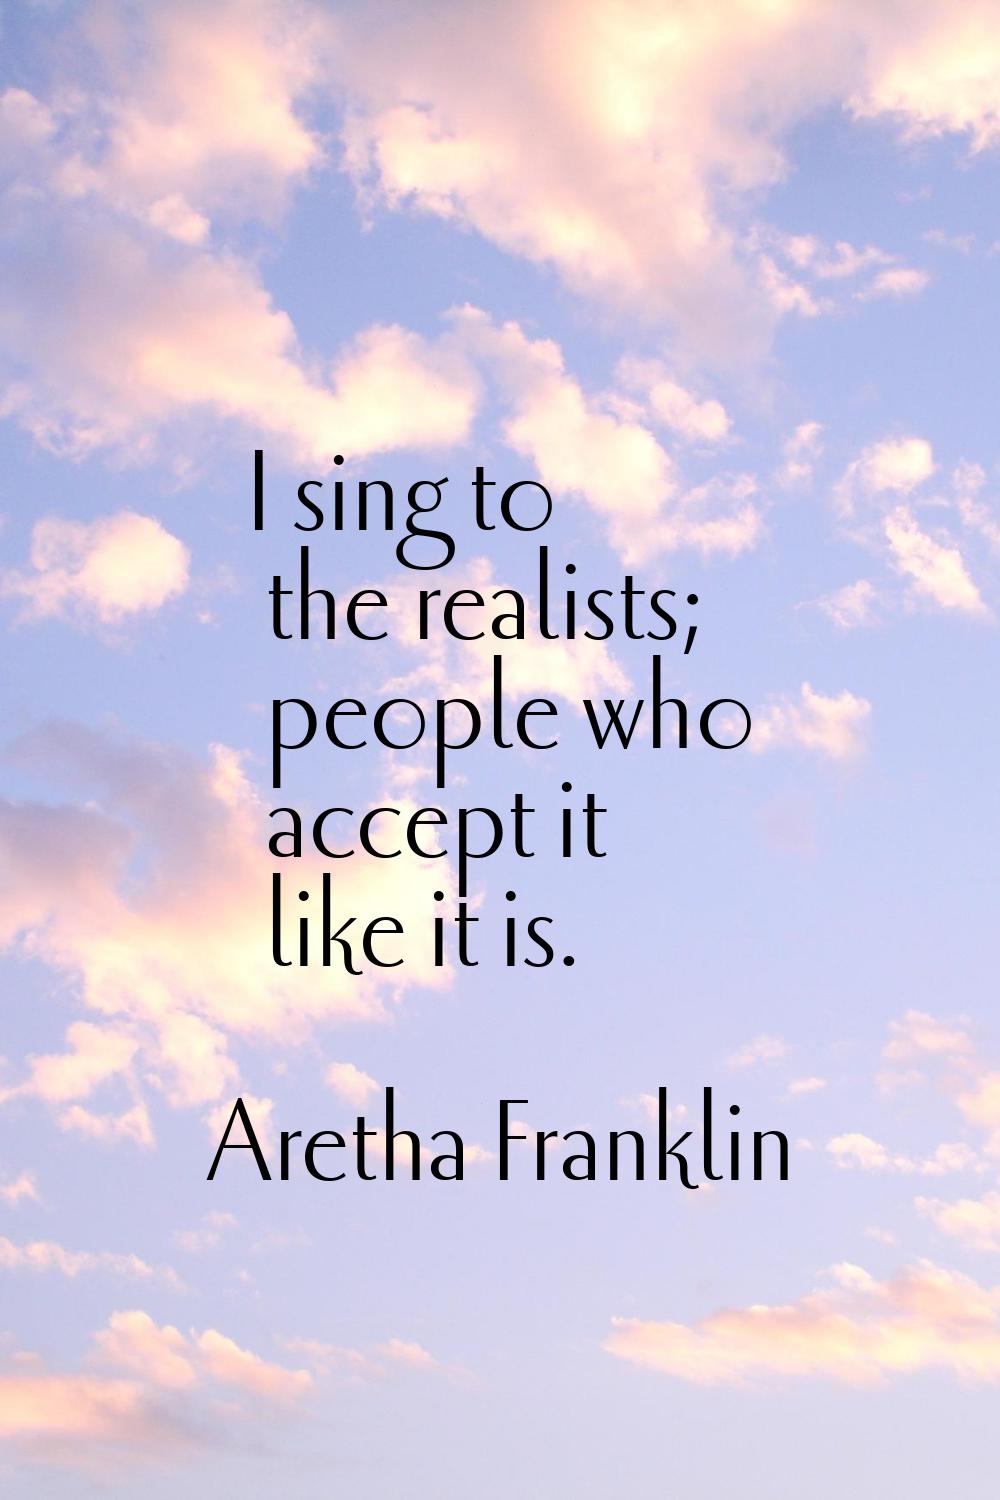 I sing to the realists; people who accept it like it is.